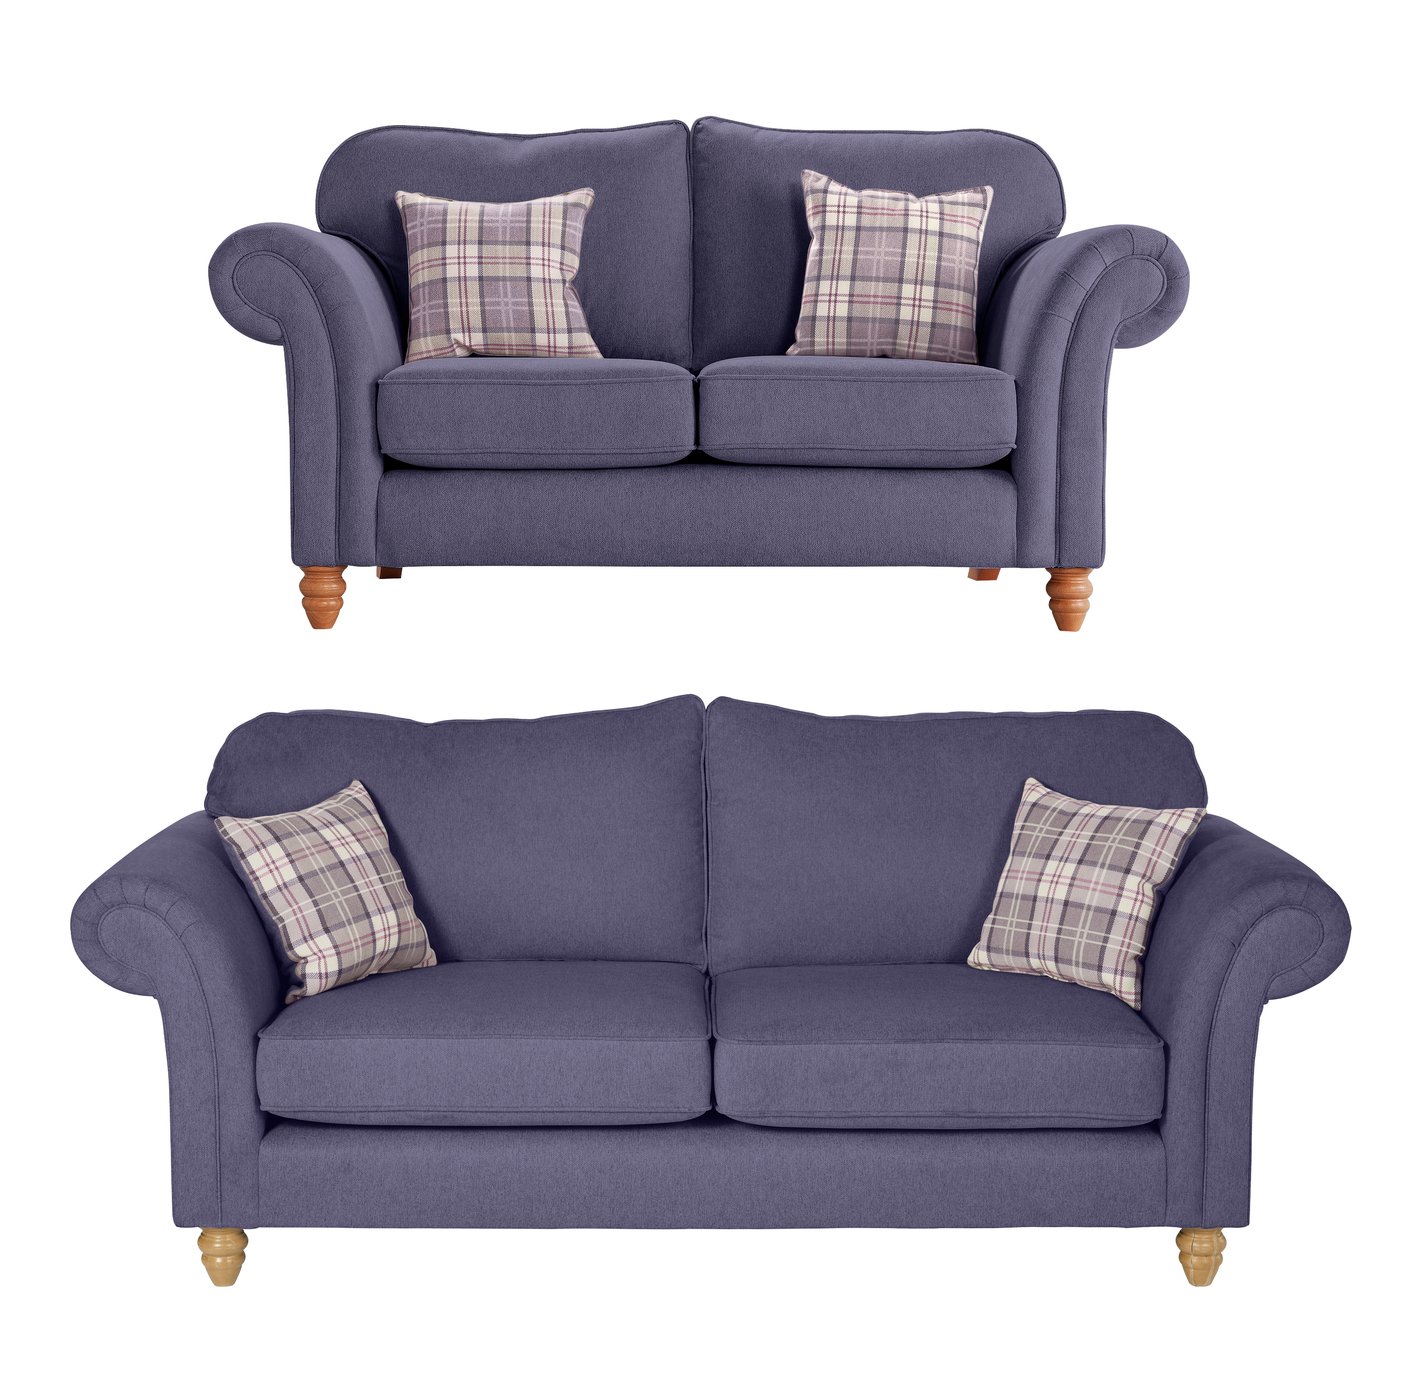 Argos Home Windsor 2 Seater & 3 Seater Sofas - Lilac